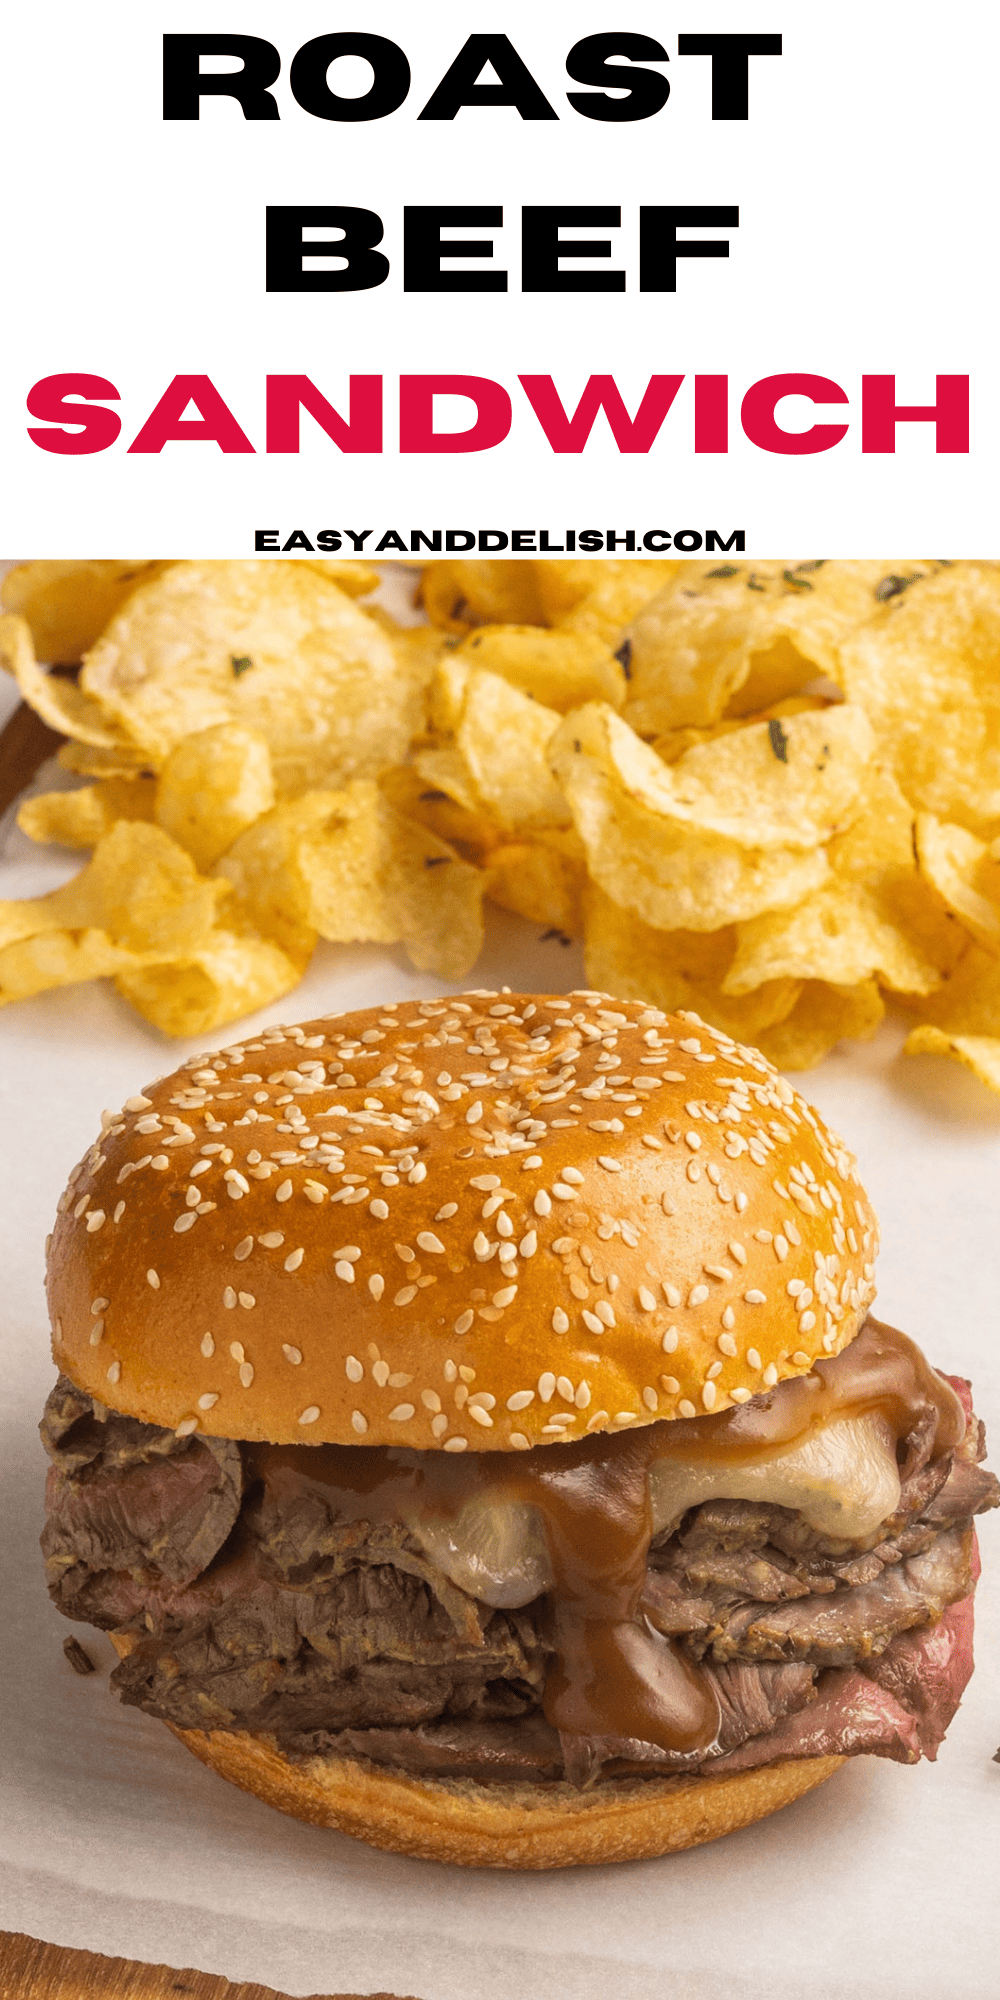 pin showing a close up of a roast beef sandwich with some potato chips on teh background.